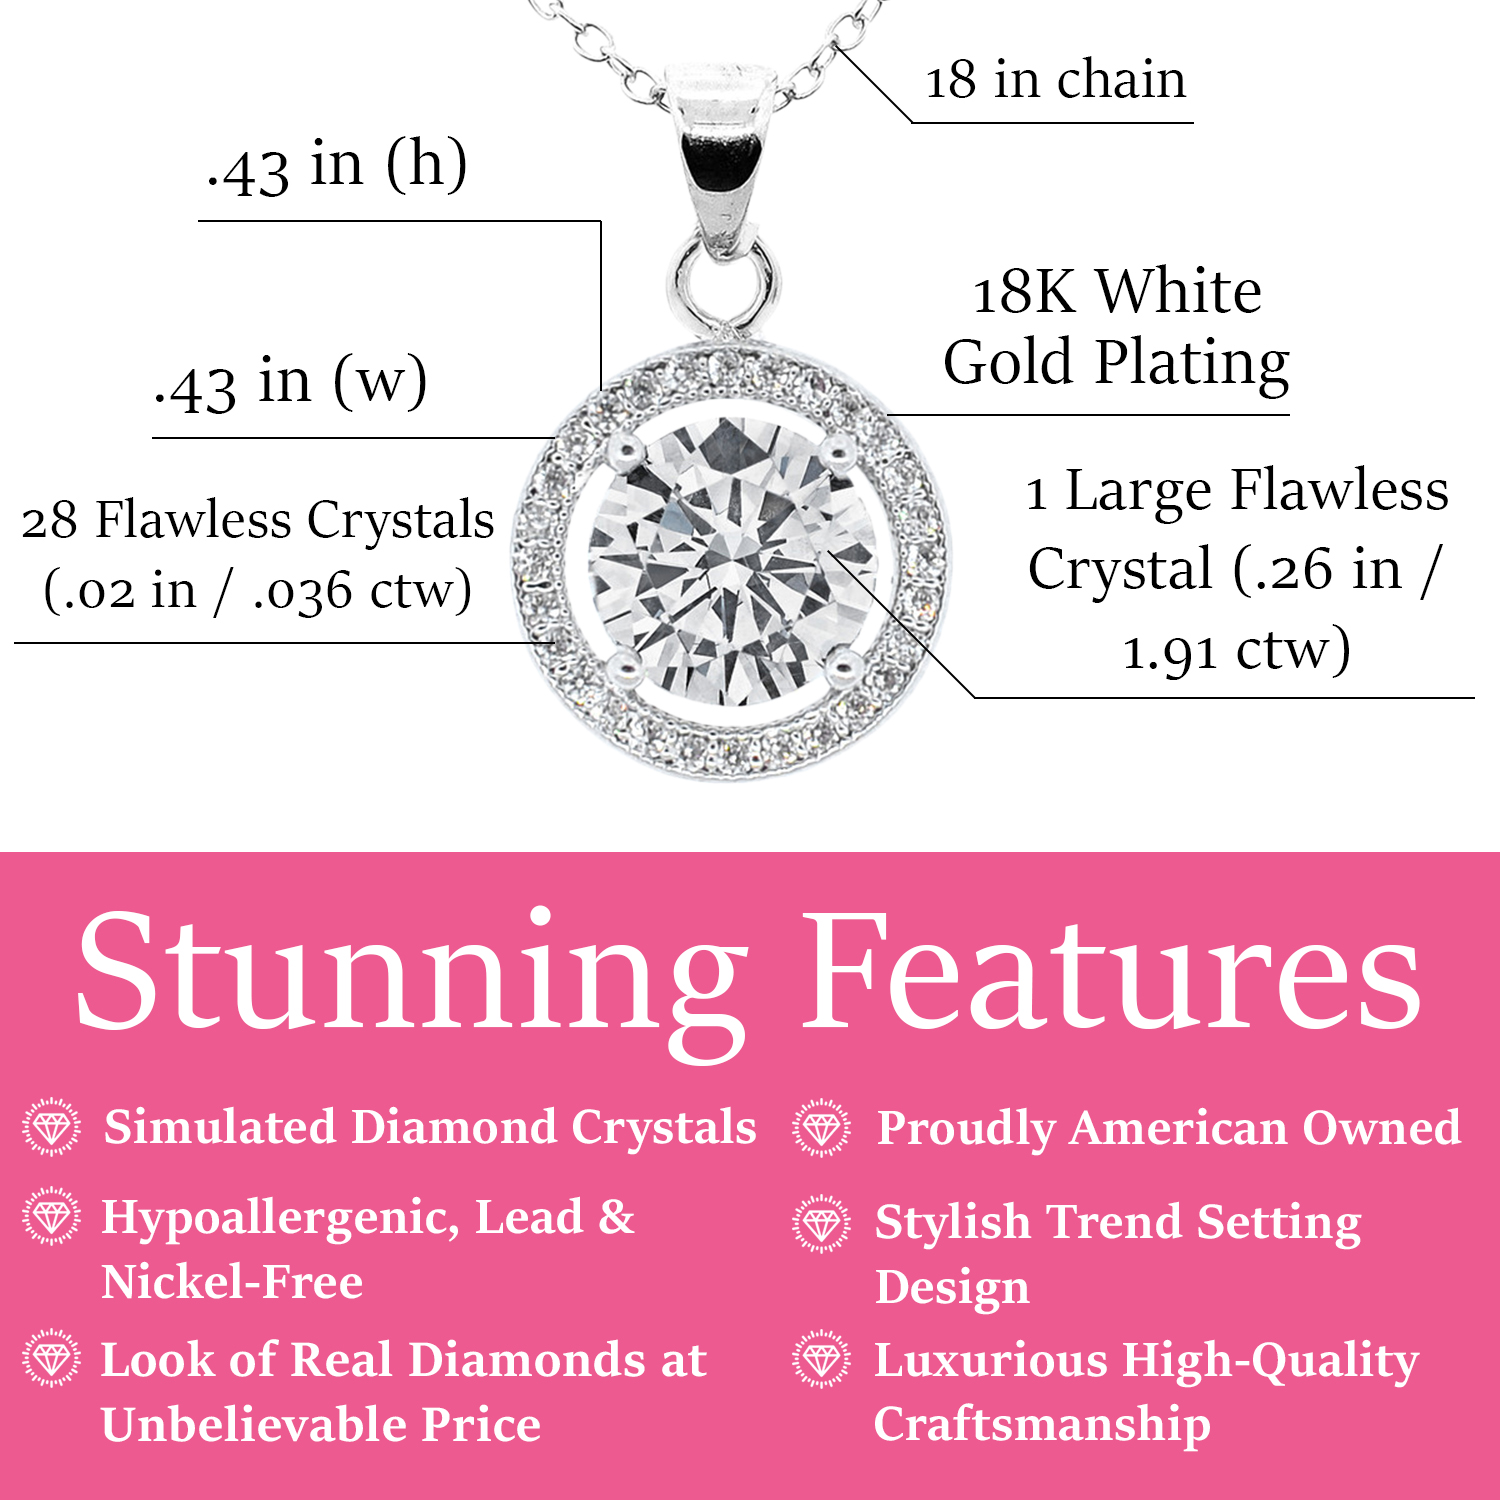 Cate & Chloe Blake 18k White Gold Plated Silver Halo Necklace | CZ Crystal Necklace for Women, Gift for Her - image 5 of 8